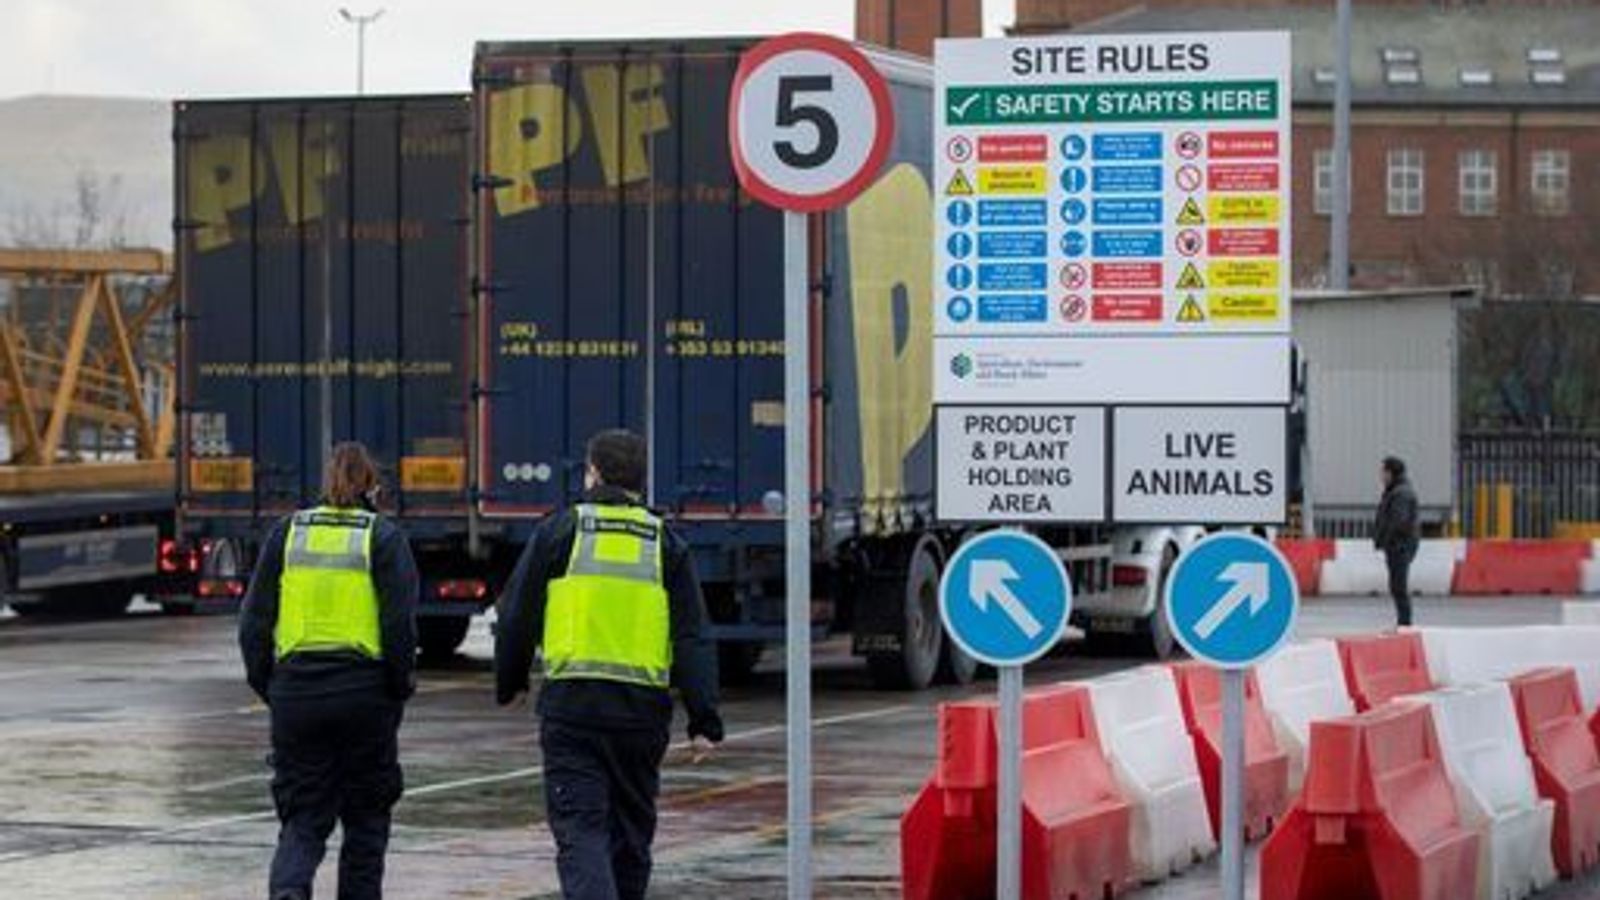 Post-Brexit checks on goods between Britain and Northern Ireland set to end under new plans